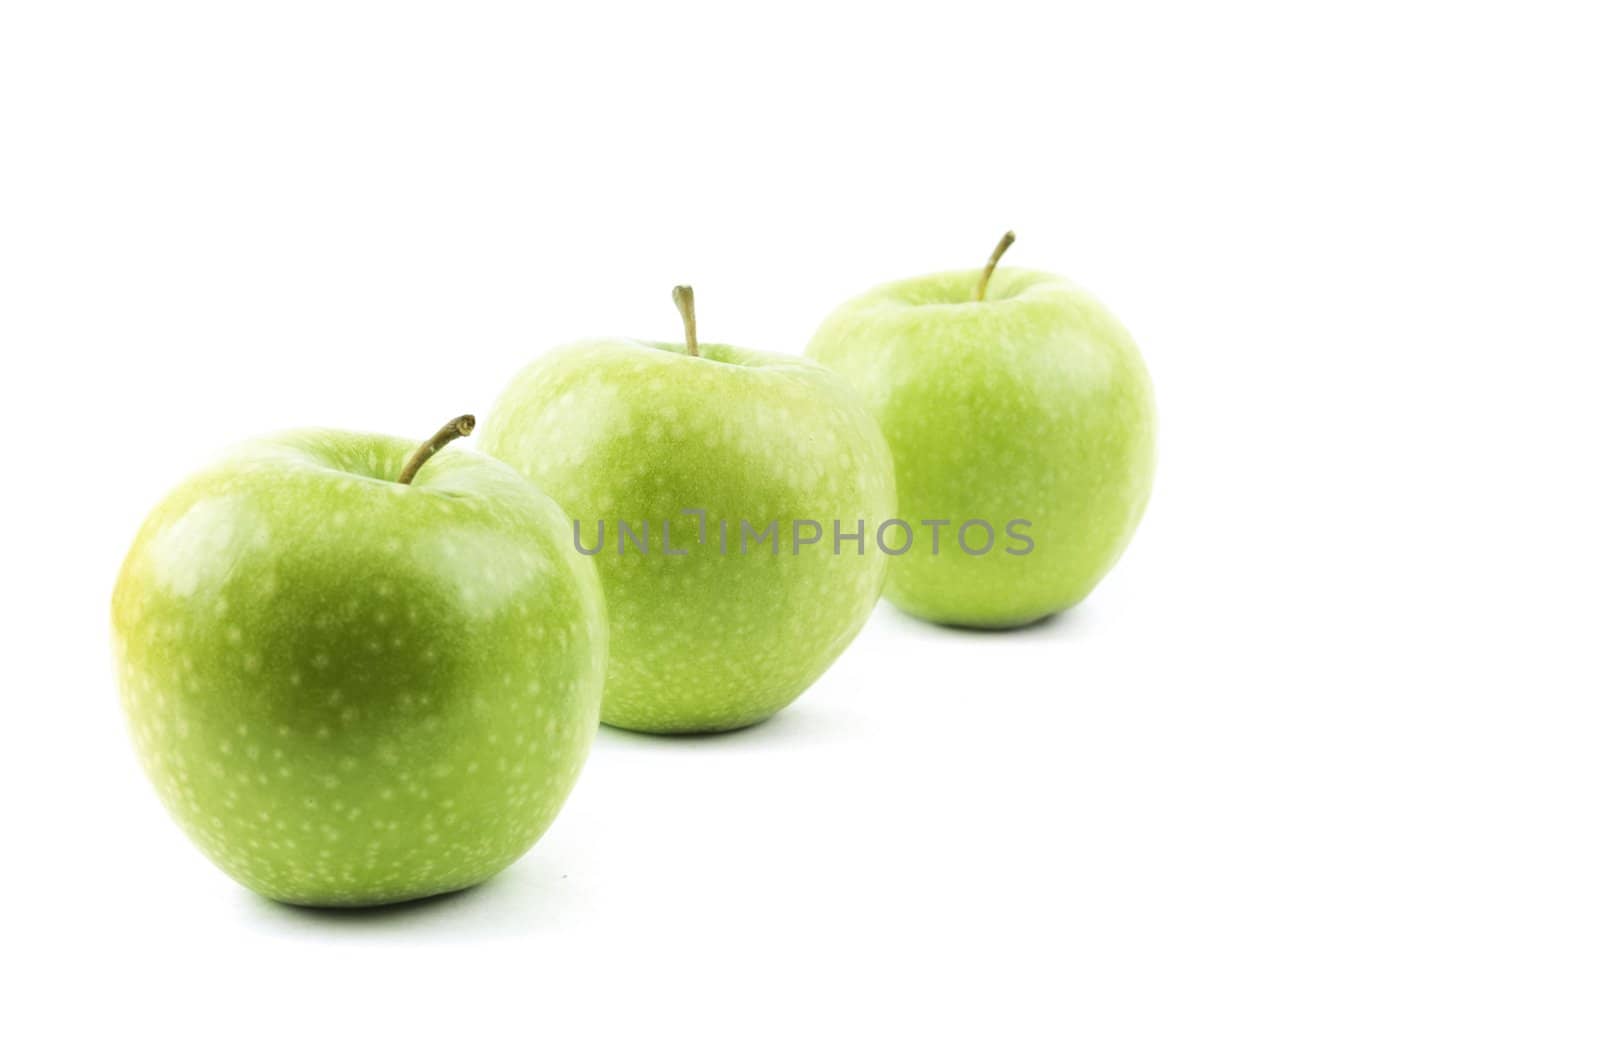 isolated perspective of three green apples by Triphka